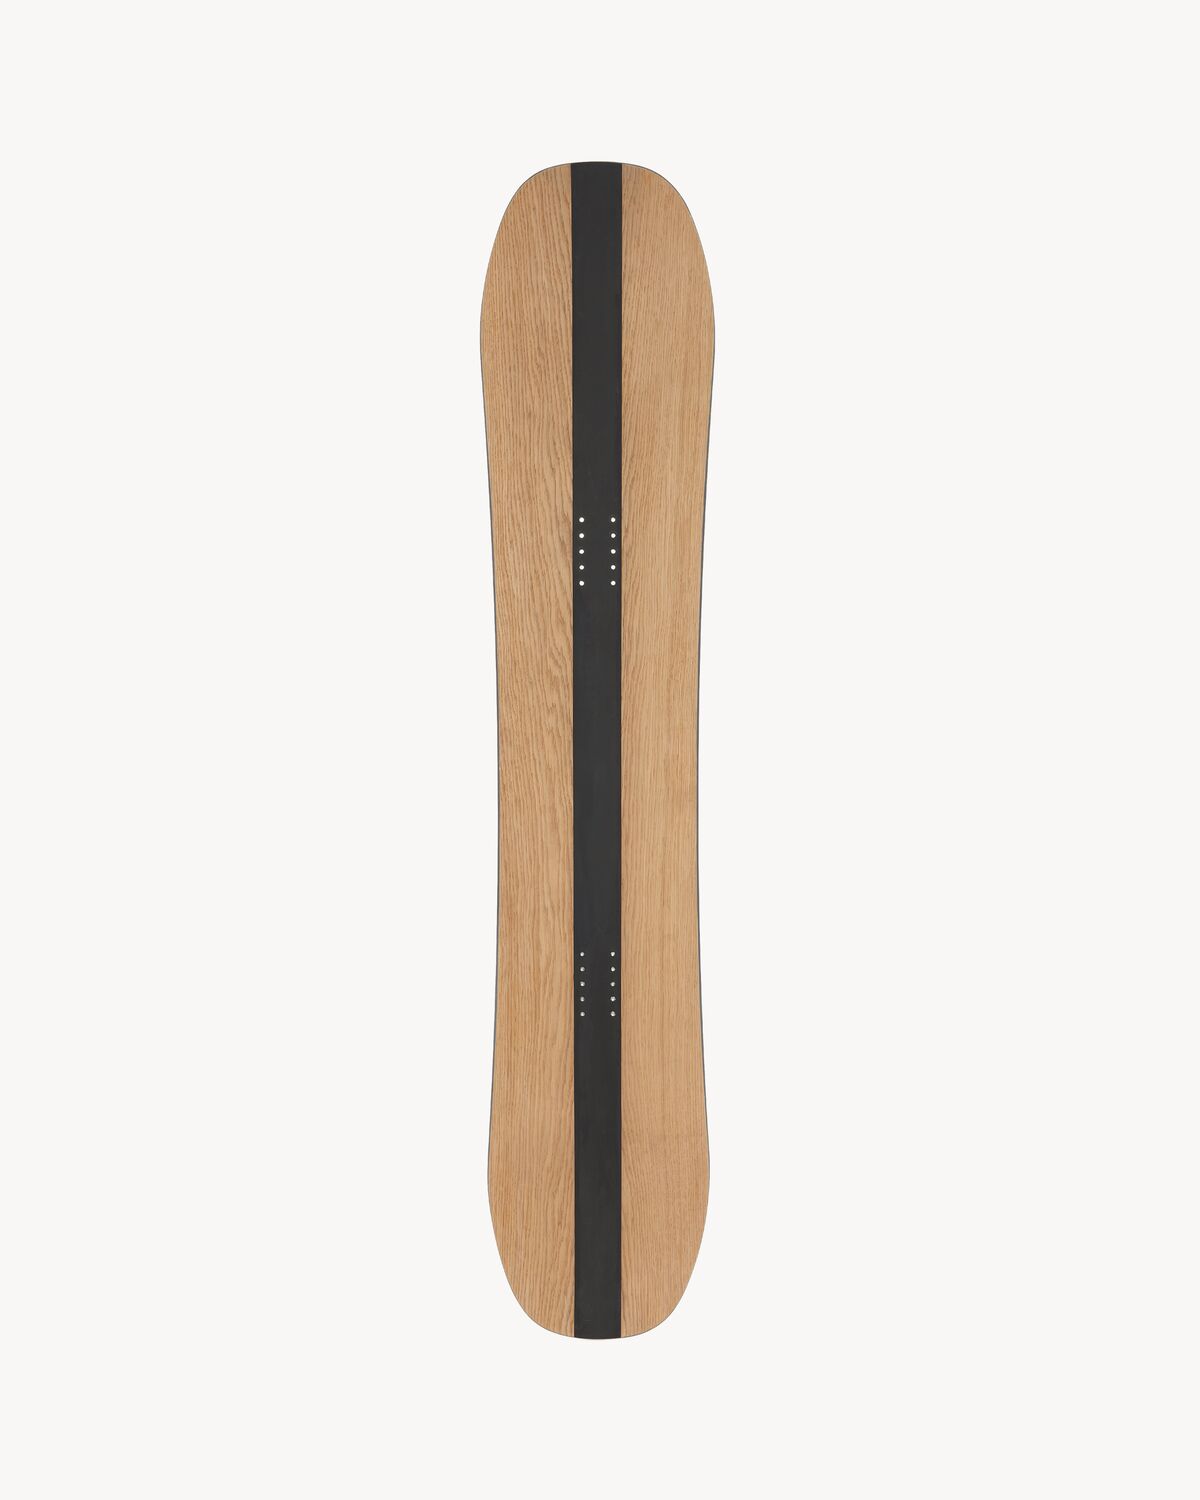 Zai Saint Laurent snowboard in wood and rubber